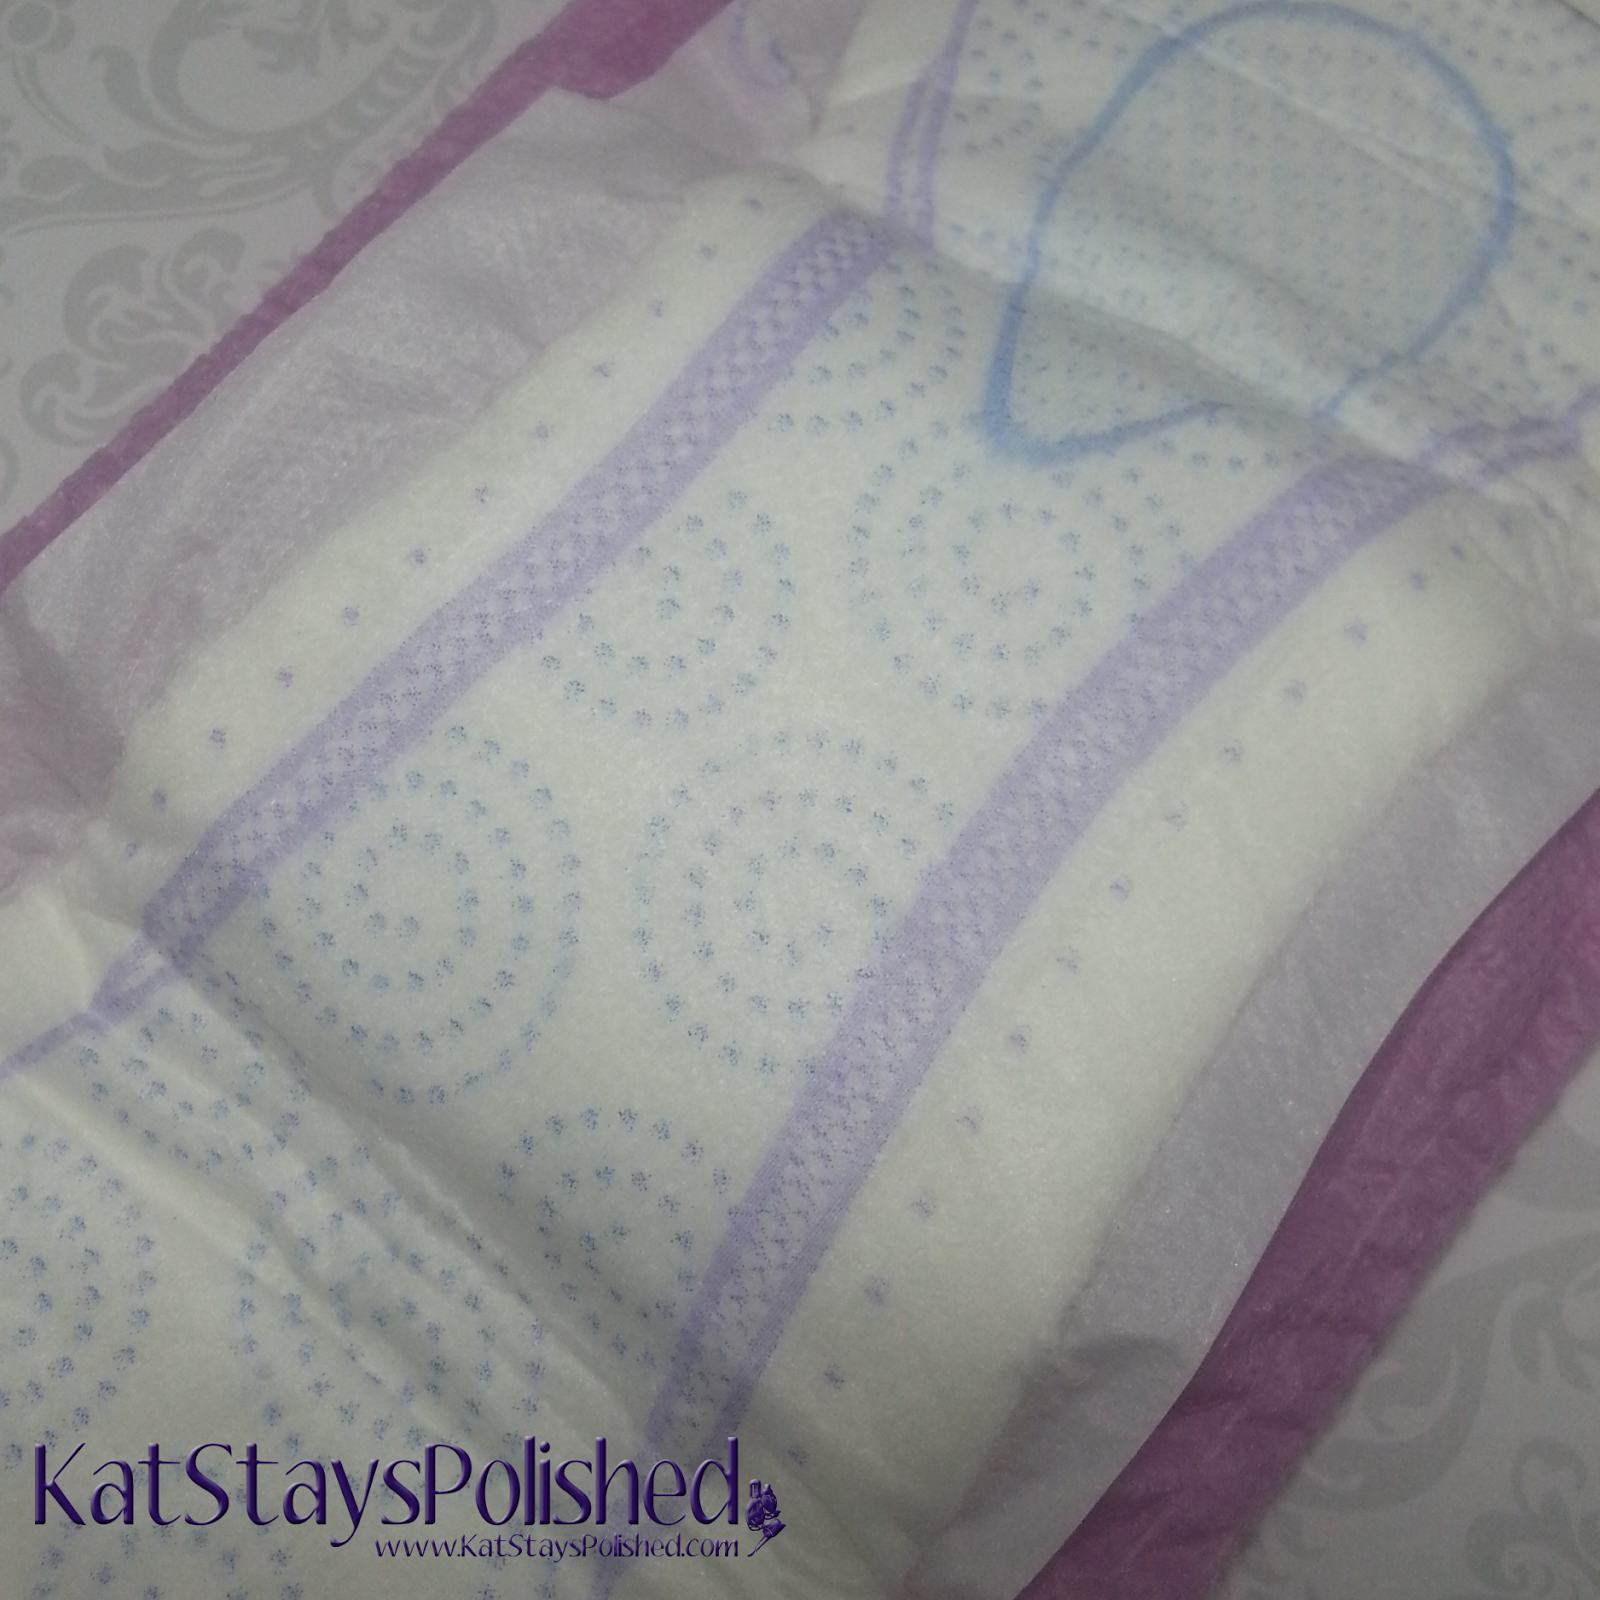 Poise Thin-Shape Pads - Recycle Your Period Pad | Kat Stays Polished